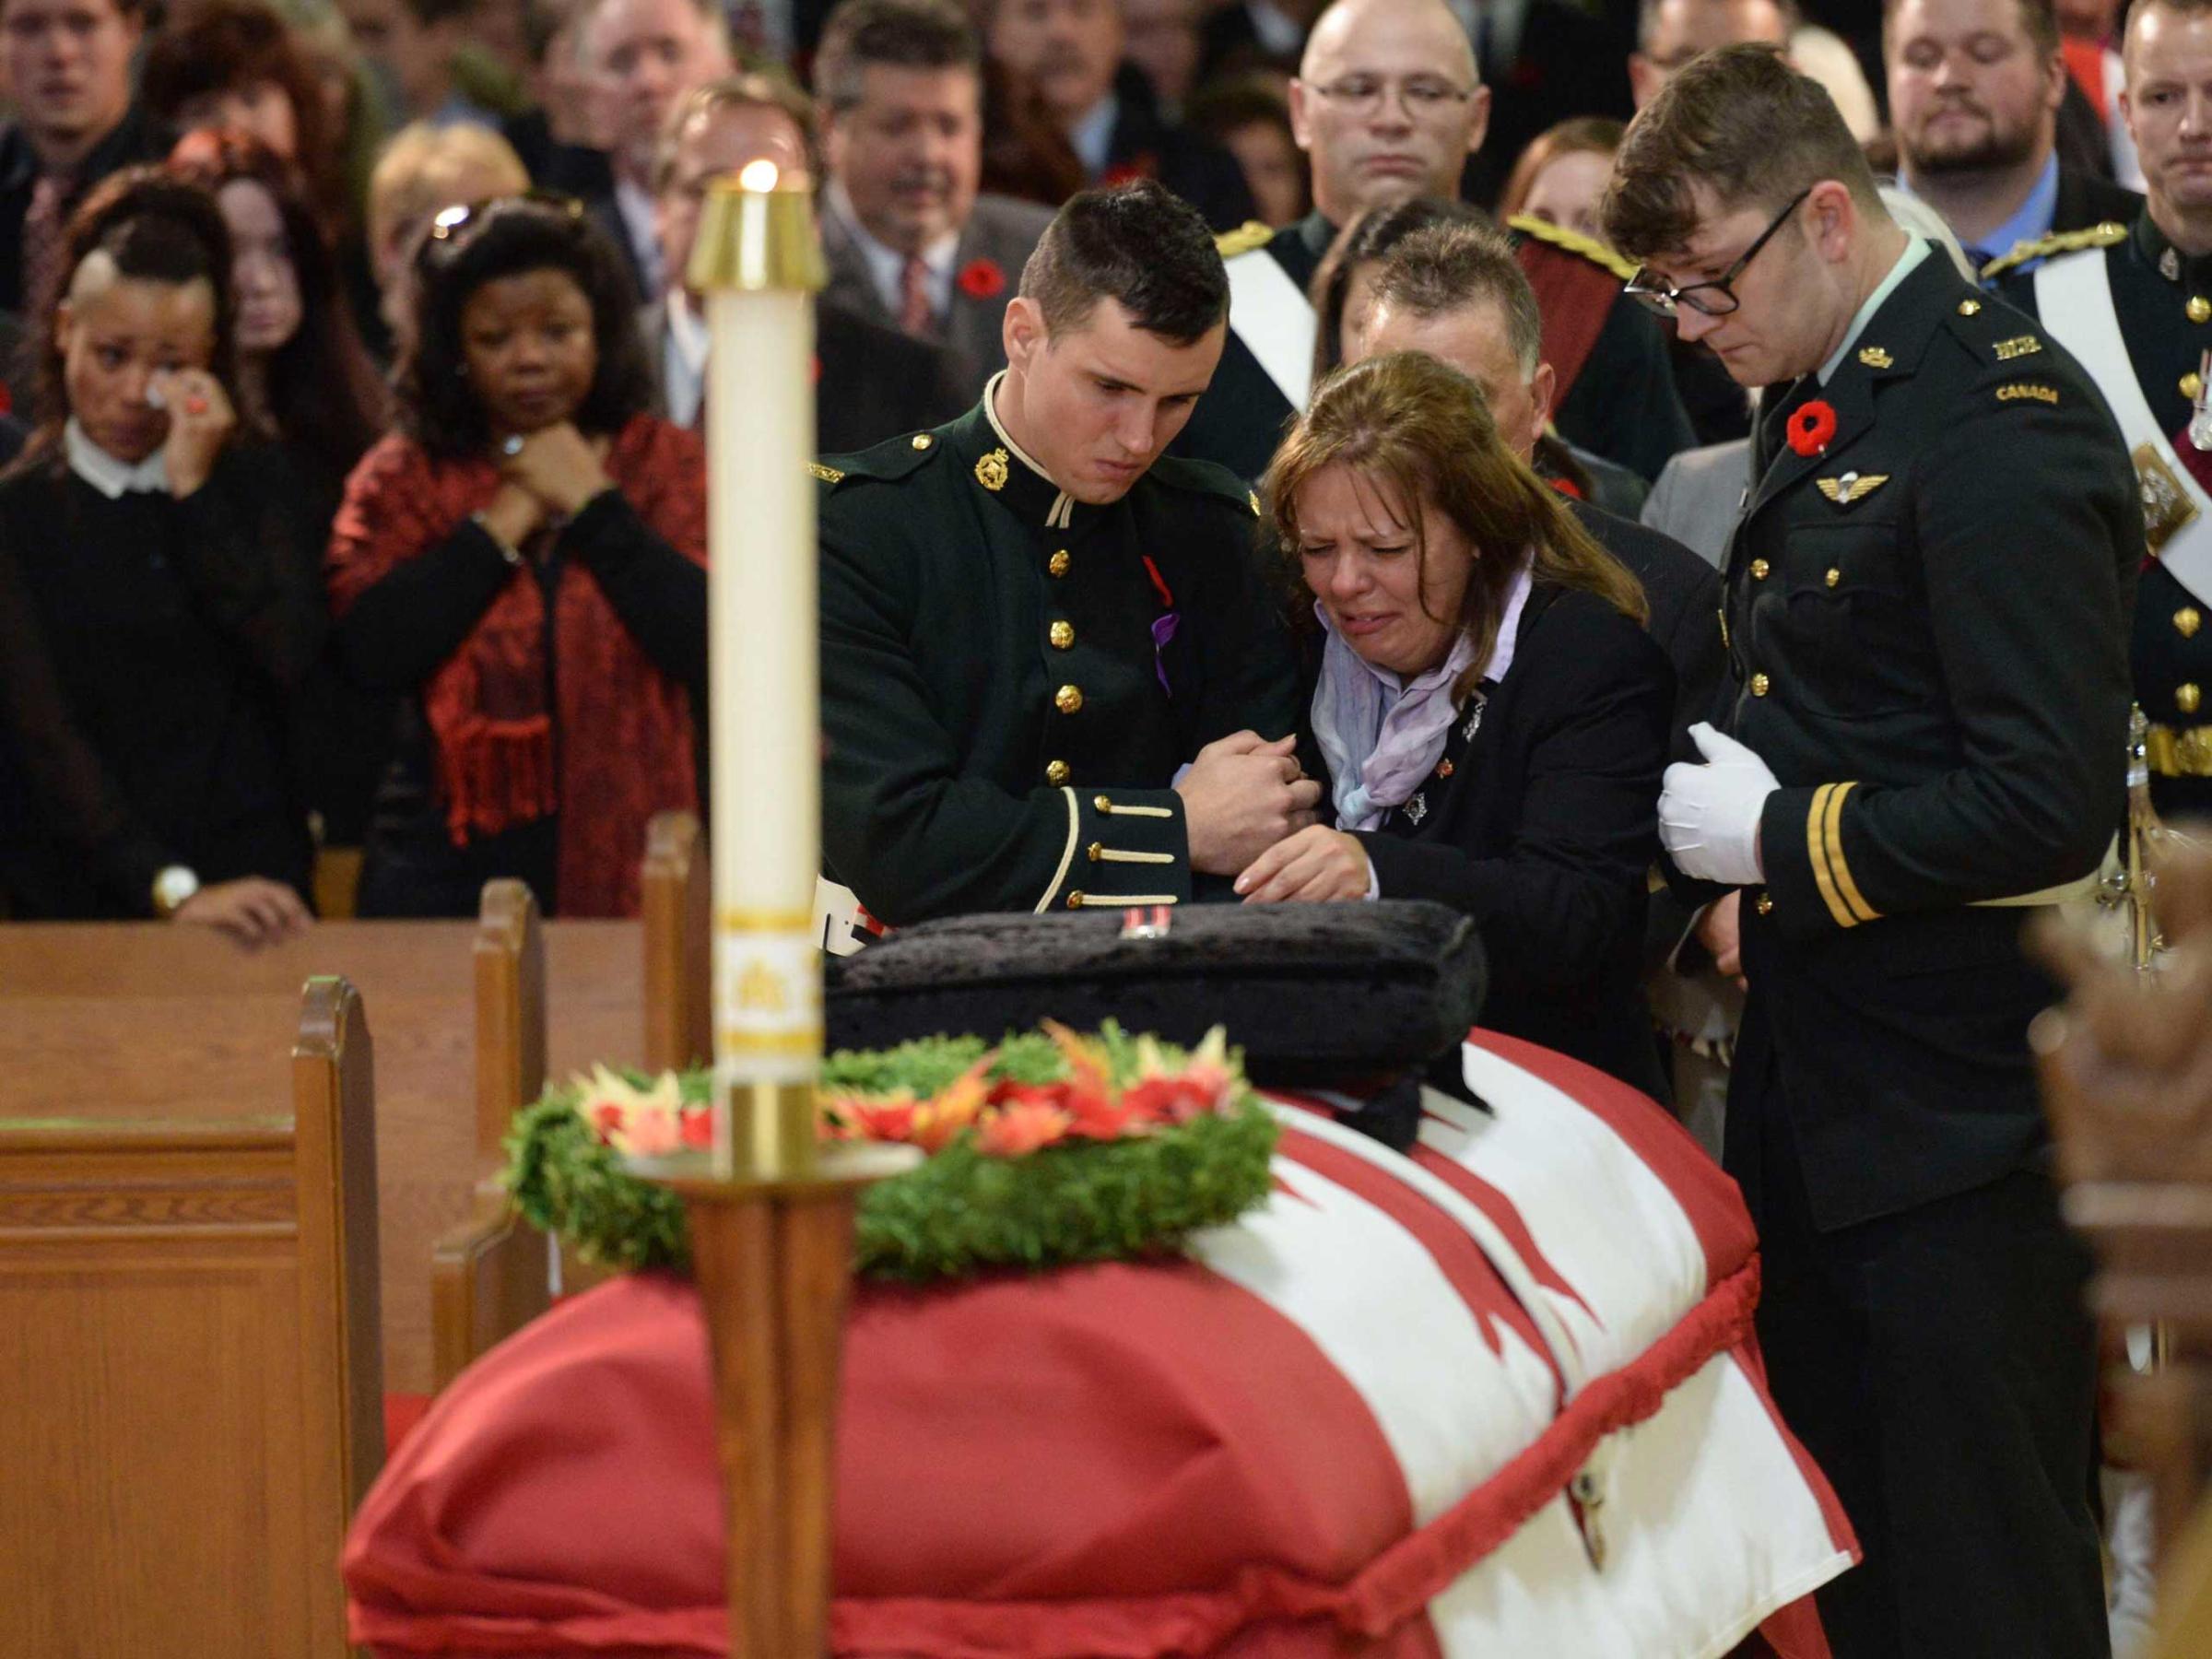 Cirillo is comforted in front of the coffin of her son Cpl. Nathan Cirillo at his regimental funeral service in Hamilton, Ontario